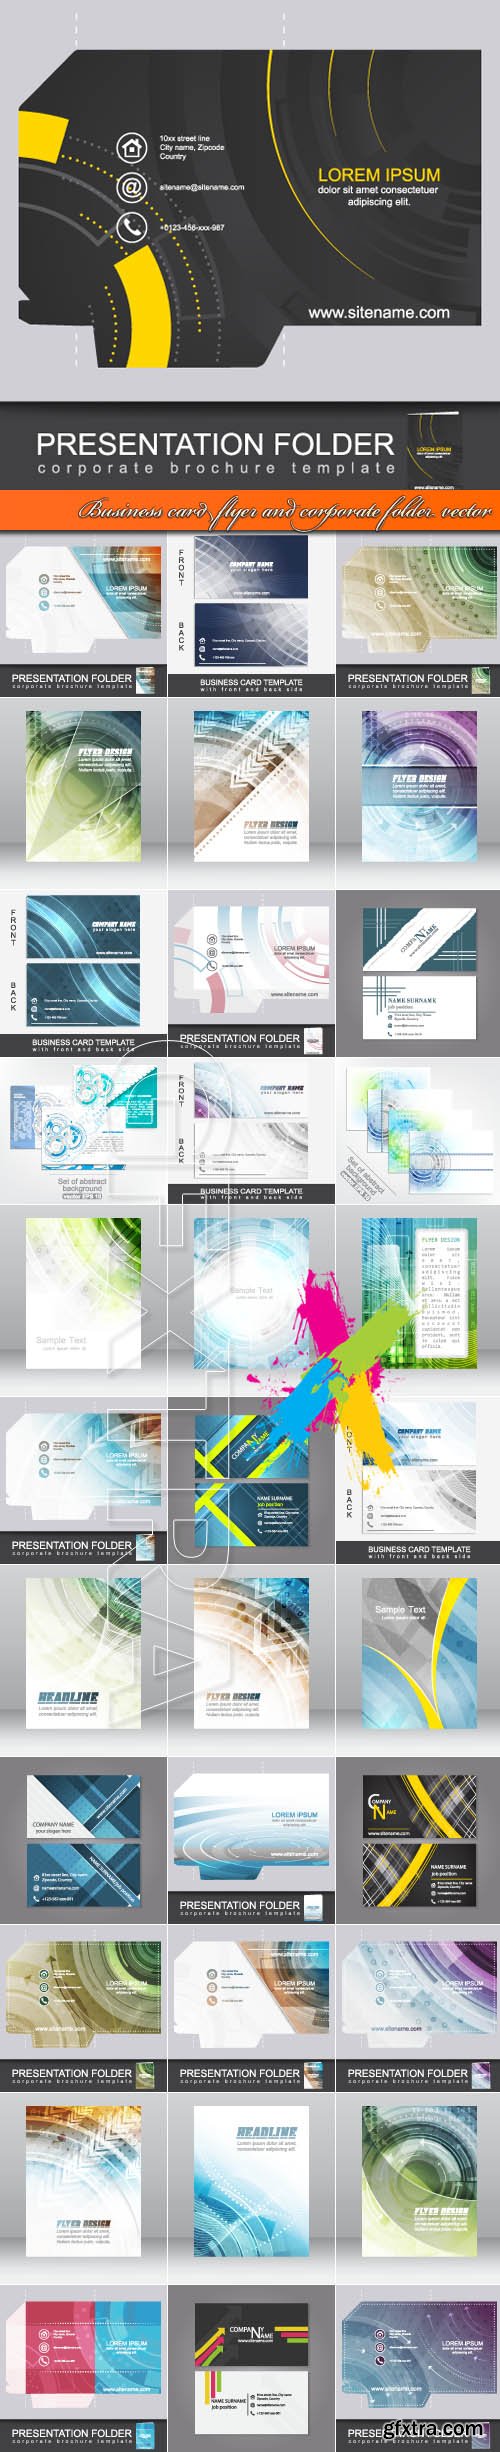 Business card flyer and corporate folder vector